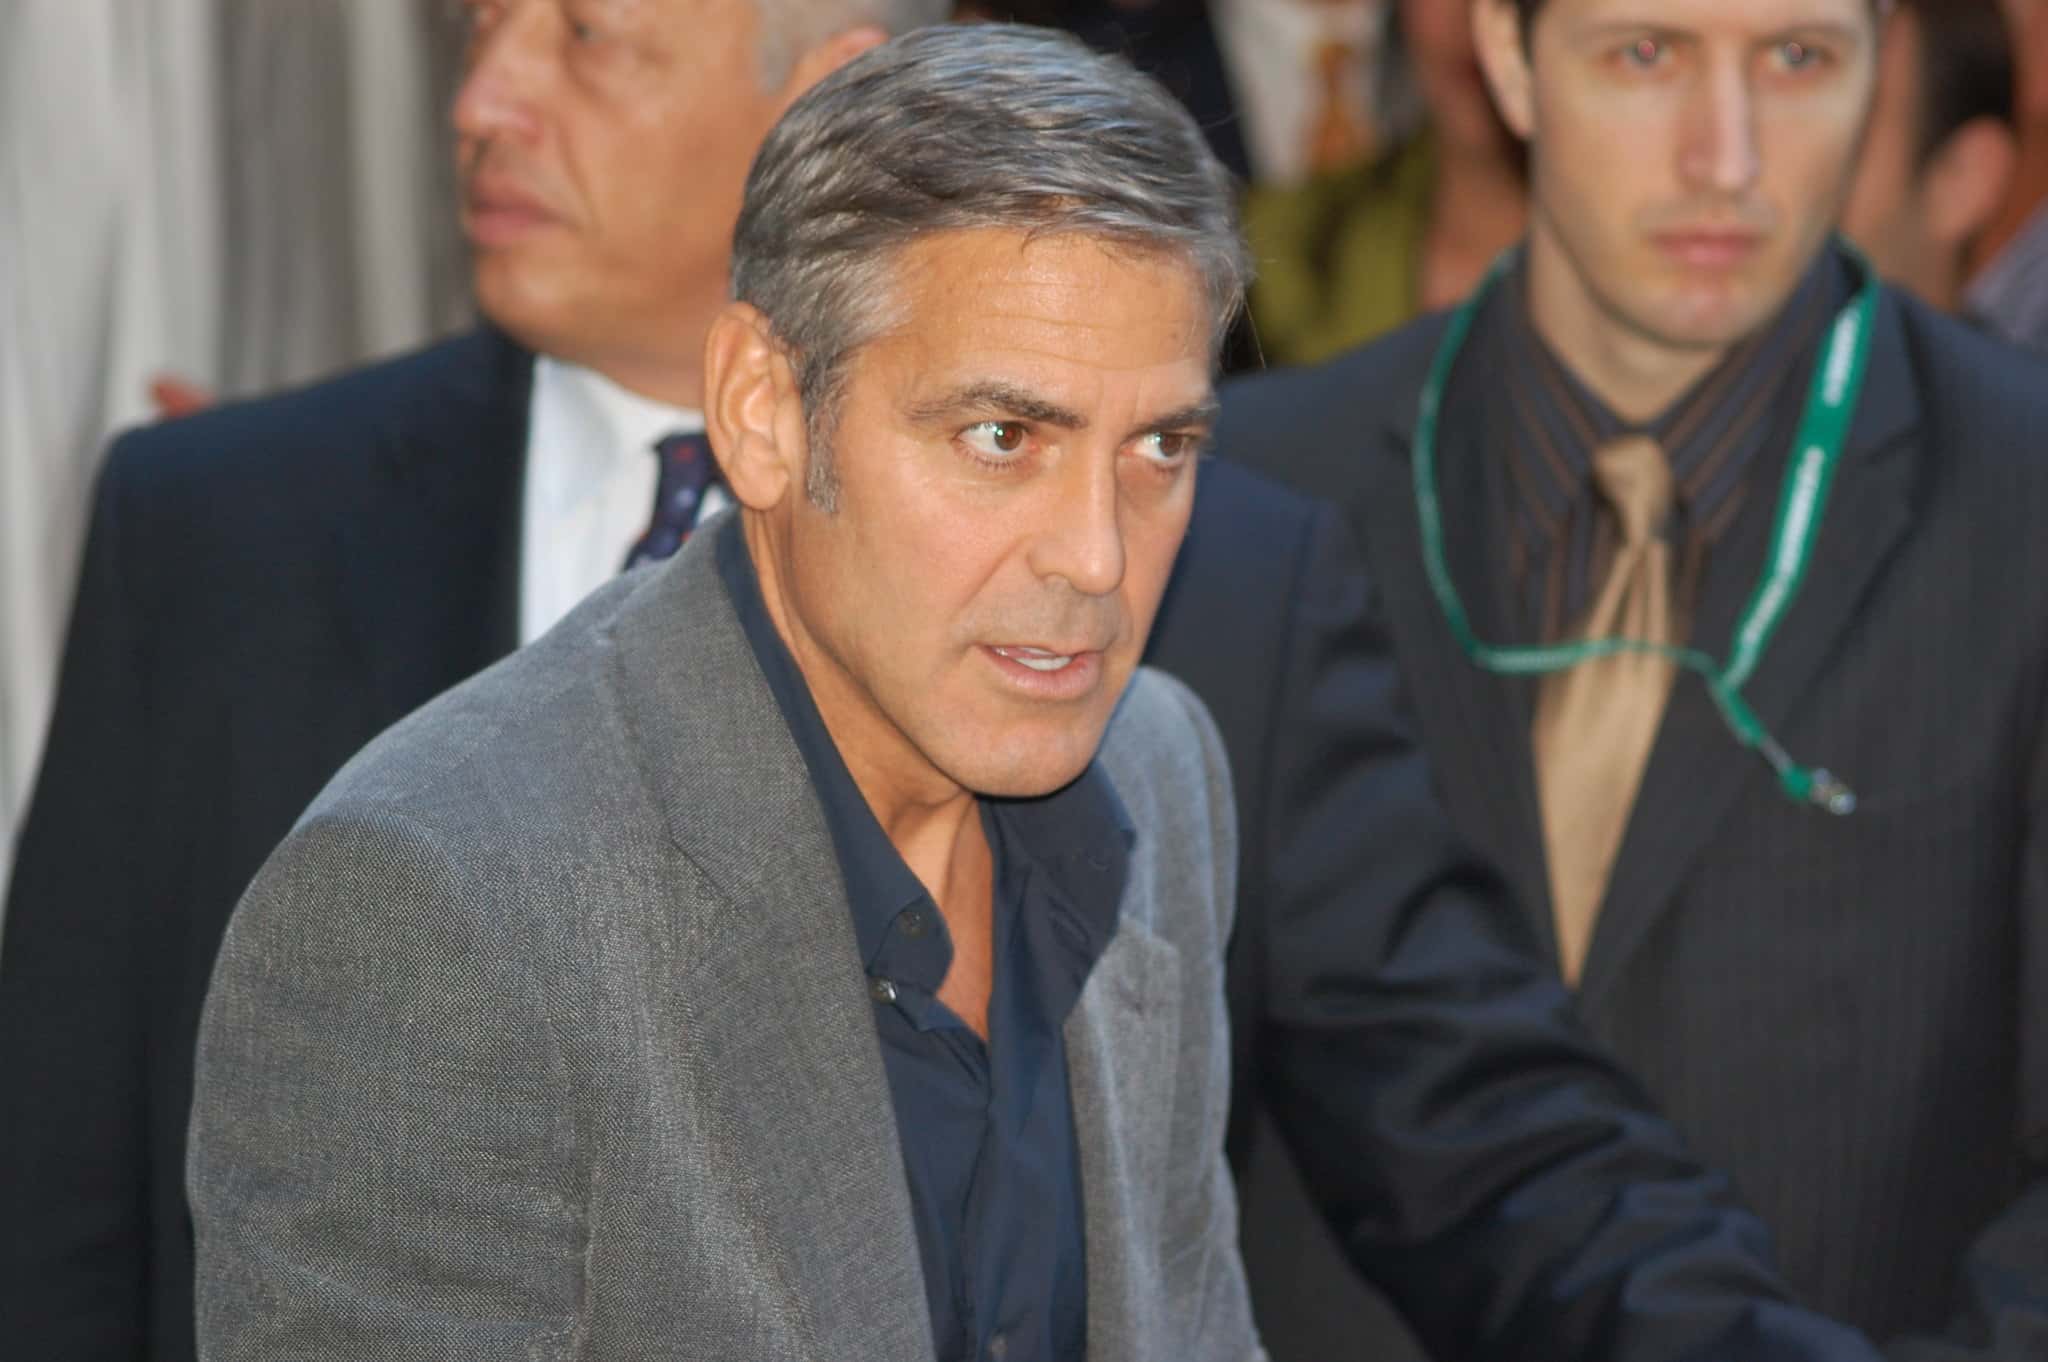 George Clooney facts